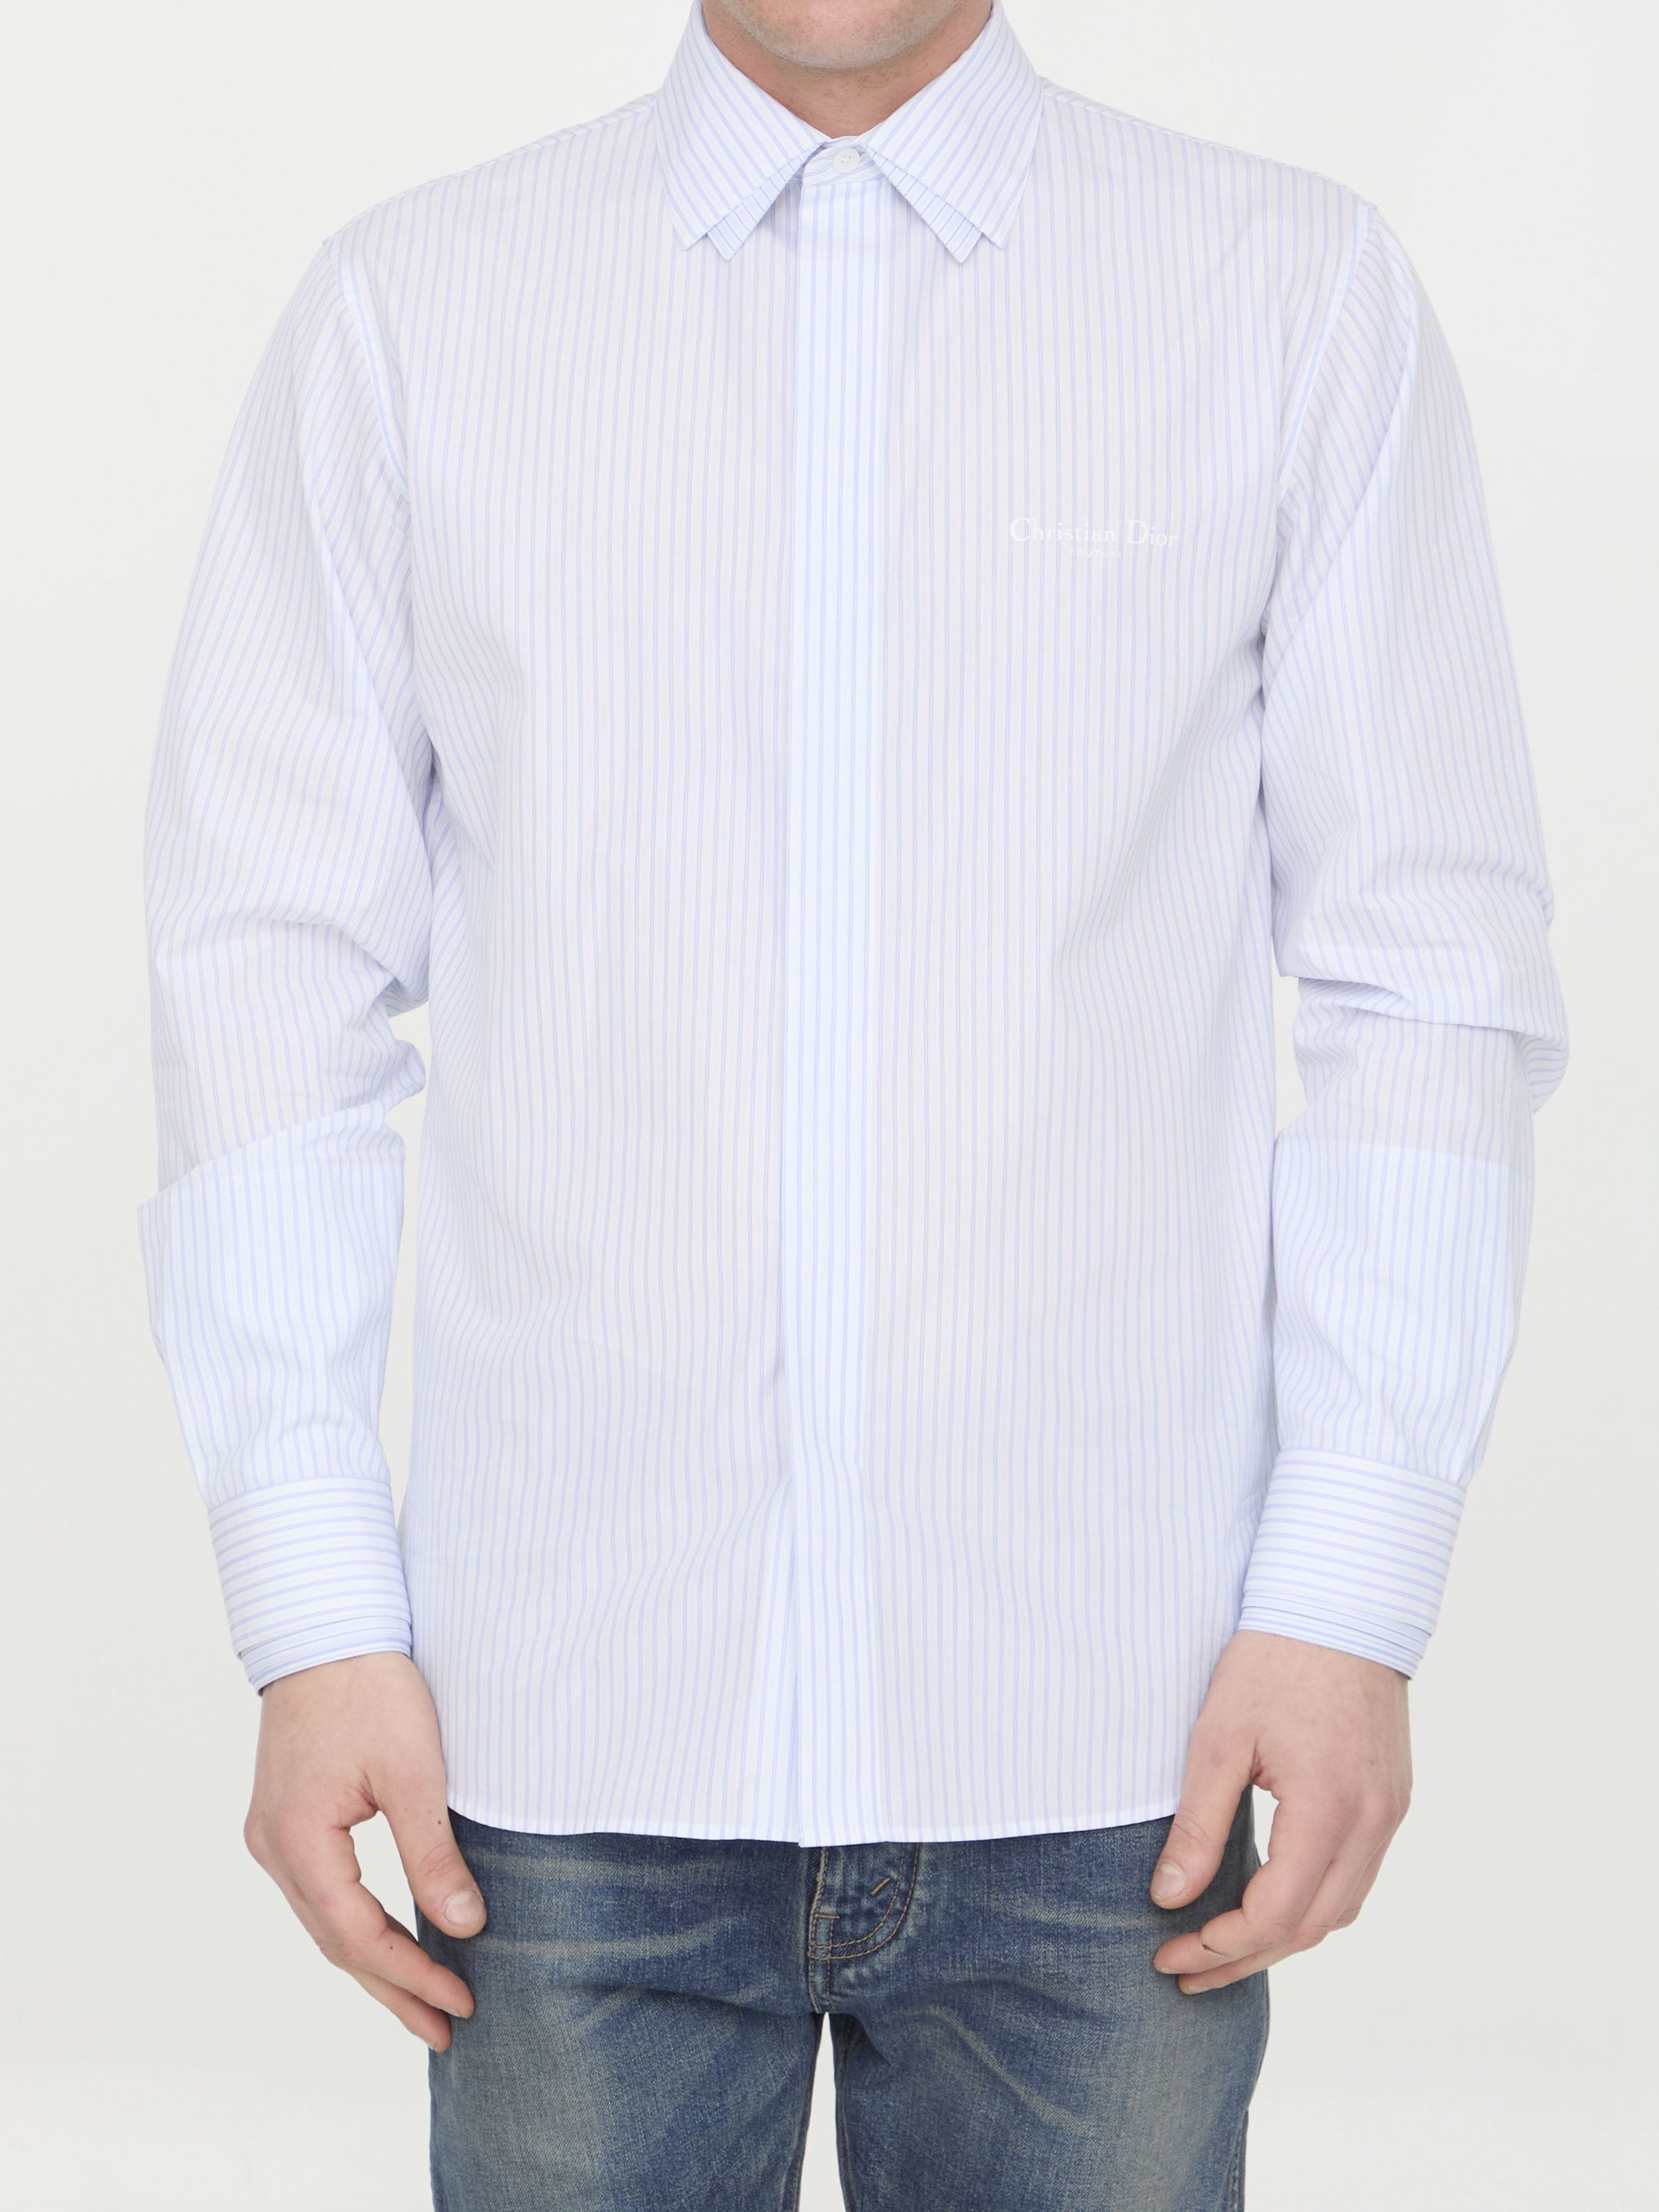 DIOR-HOMME-OUTLET-SALE-Christian-Dior-Couture-shirt-Shirts-41-WHITE-ARCHIVE-COLLECTION.jpg